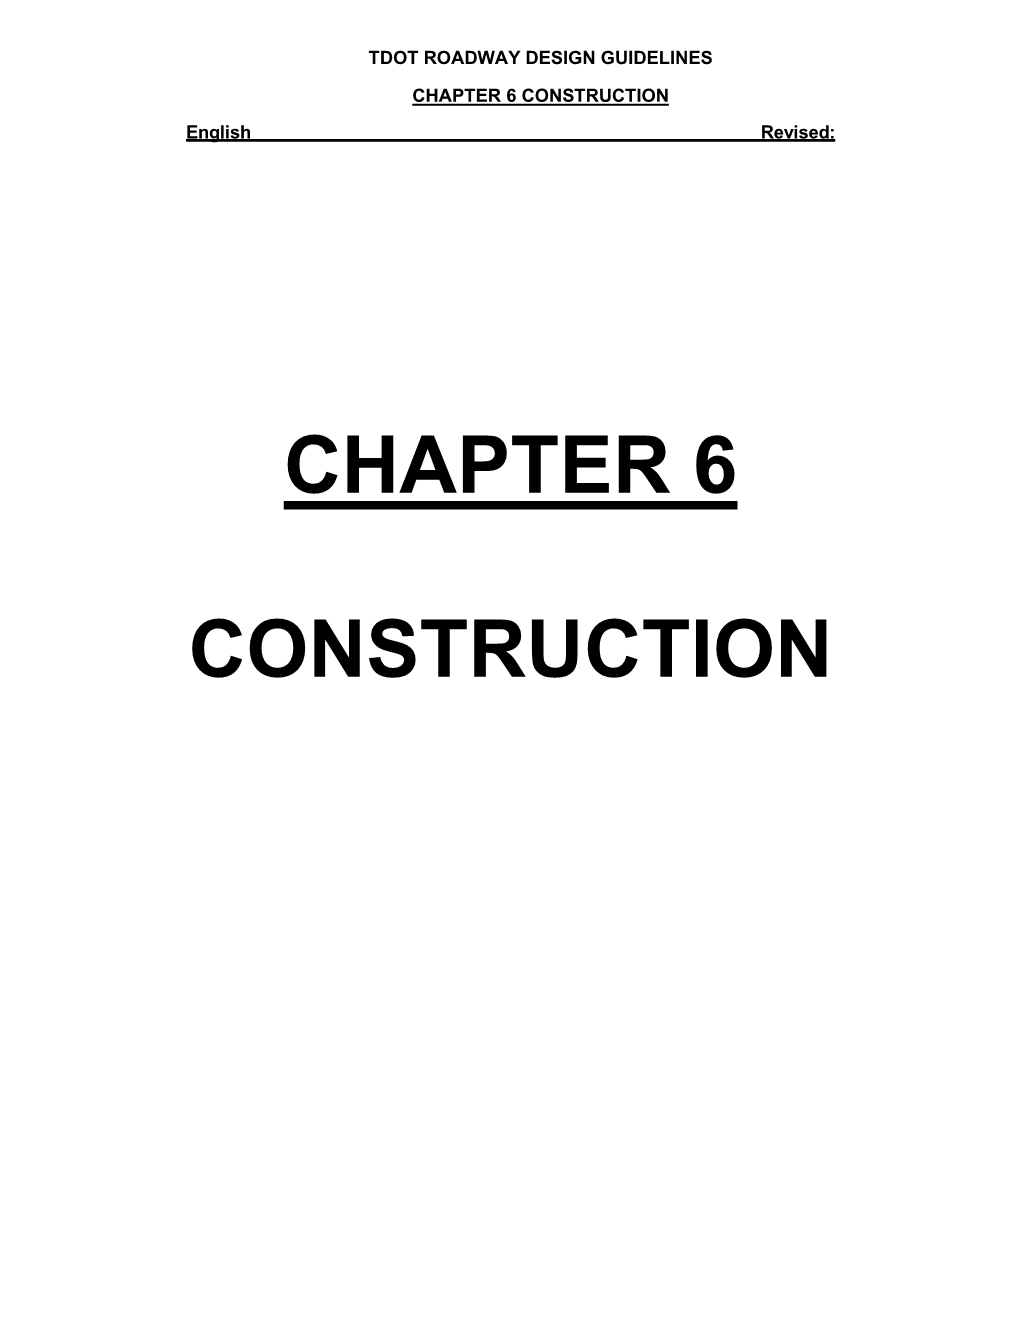 CHAPTER 6 CONSTRUCTION English Revised